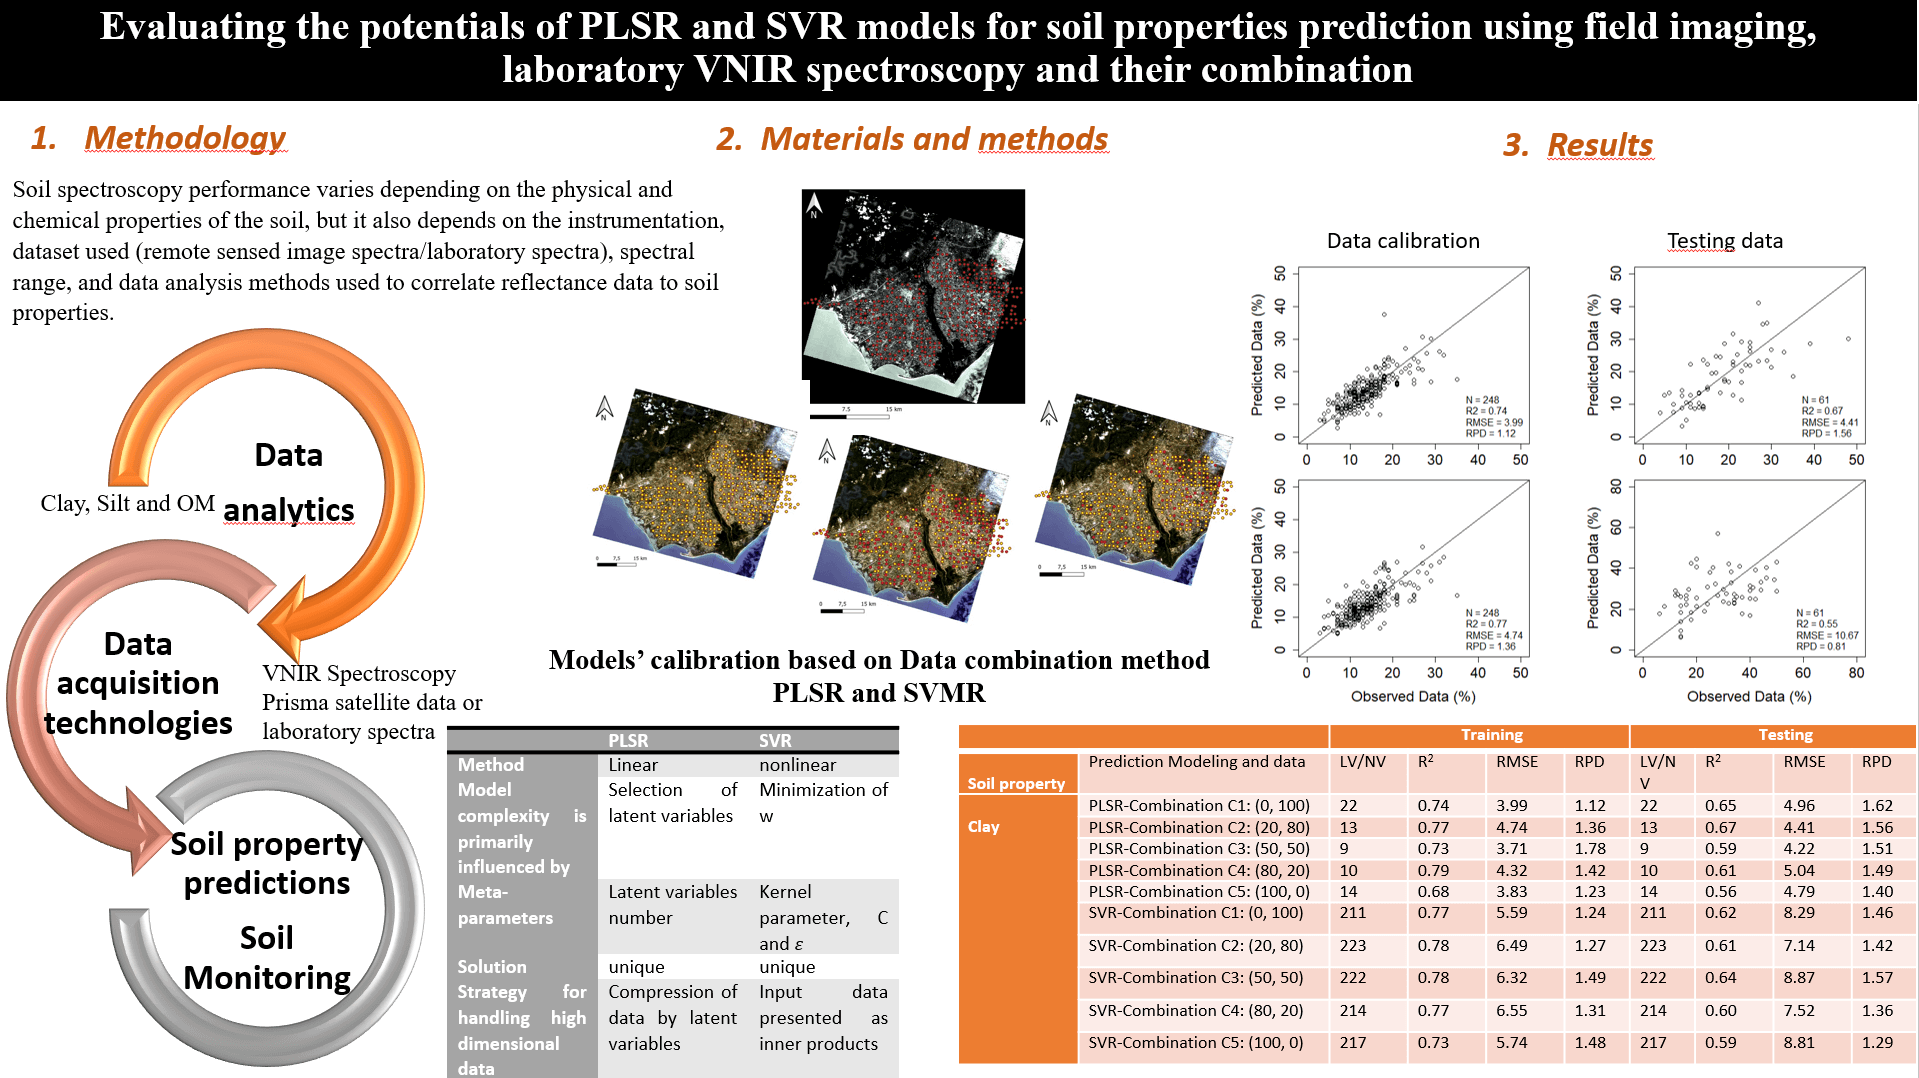 Evaluating the Potentials of PLSR and SVR Models for Soil Properties Prediction Using Field Imaging, Laboratory VNIR Spectroscopy and Their Combination